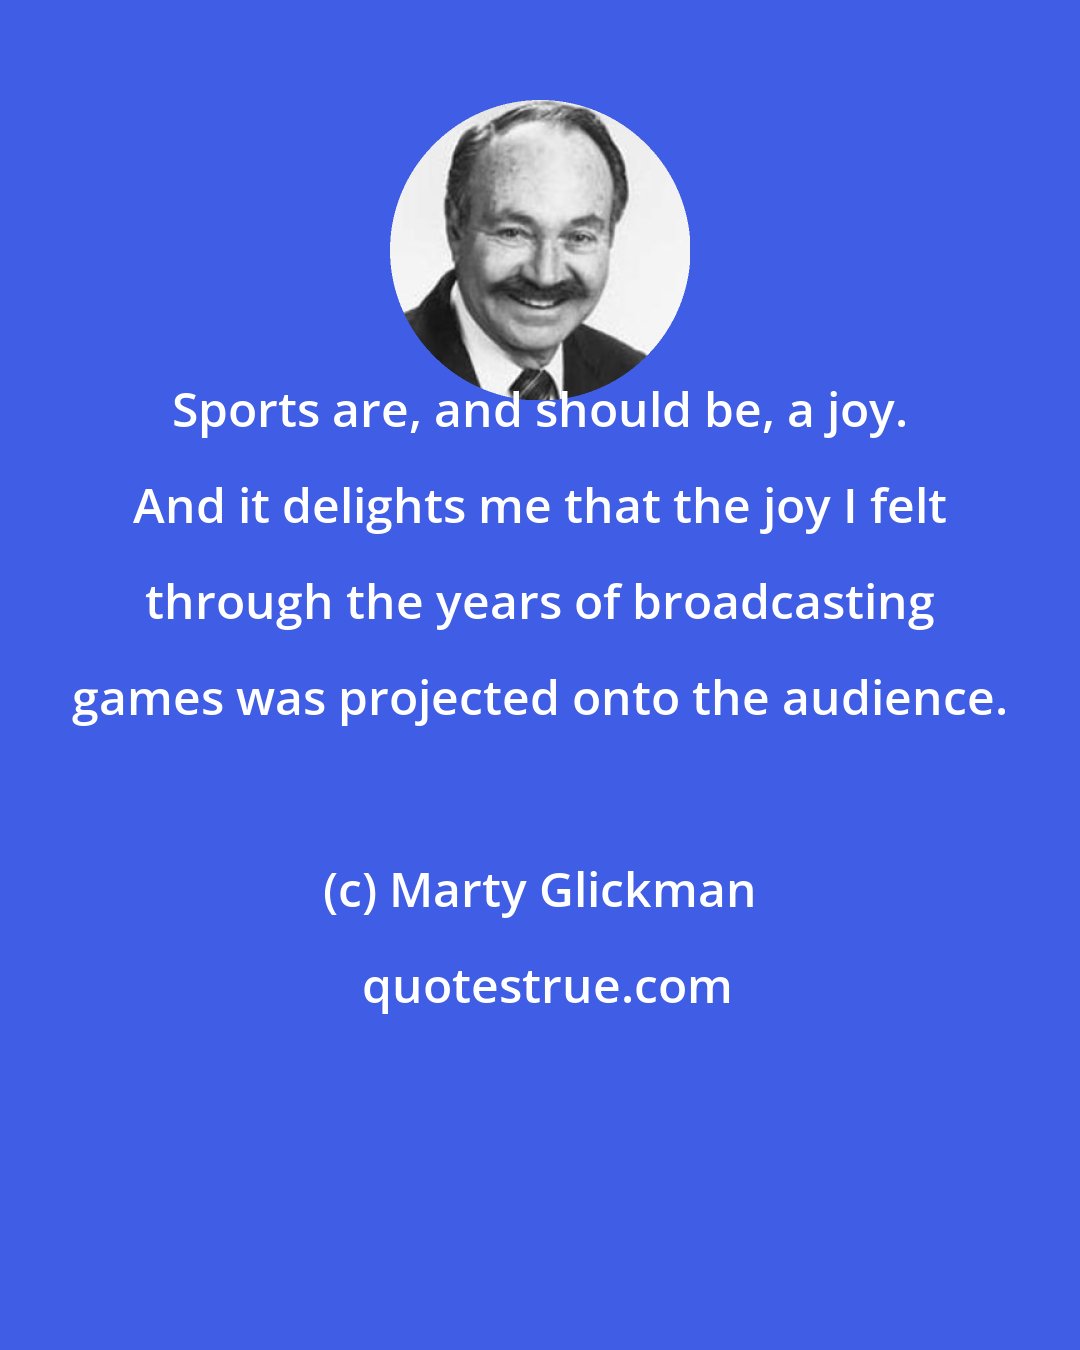 Marty Glickman: Sports are, and should be, a joy. And it delights me that the joy I felt through the years of broadcasting games was projected onto the audience.